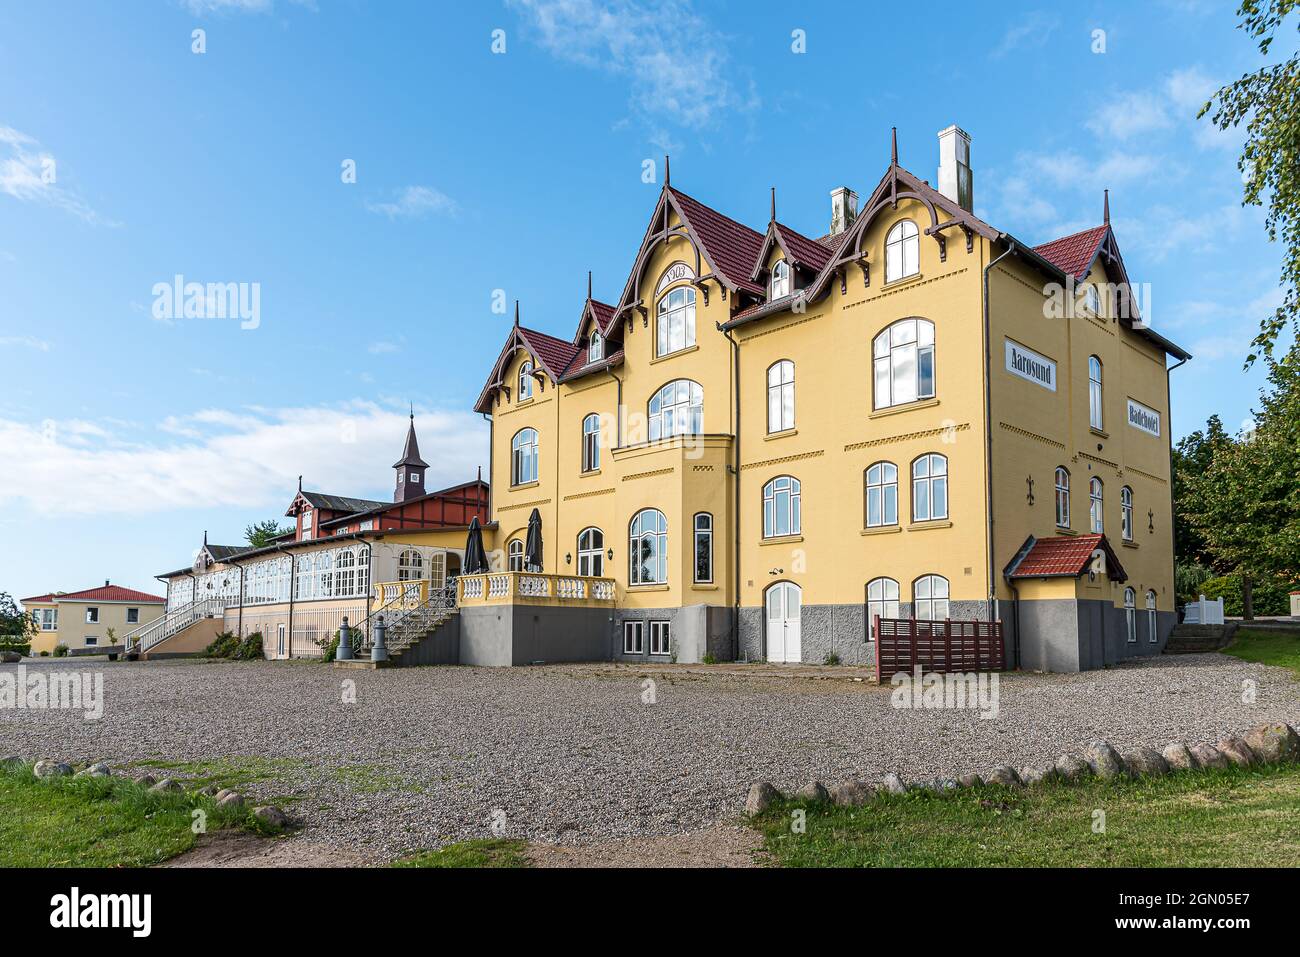 Historic seaside hotel in the center of Aarøsund was built in the early 1900s, it has an famous gourmet rstaurant called the emperor´s saloon, Åarøsun Stock Photo